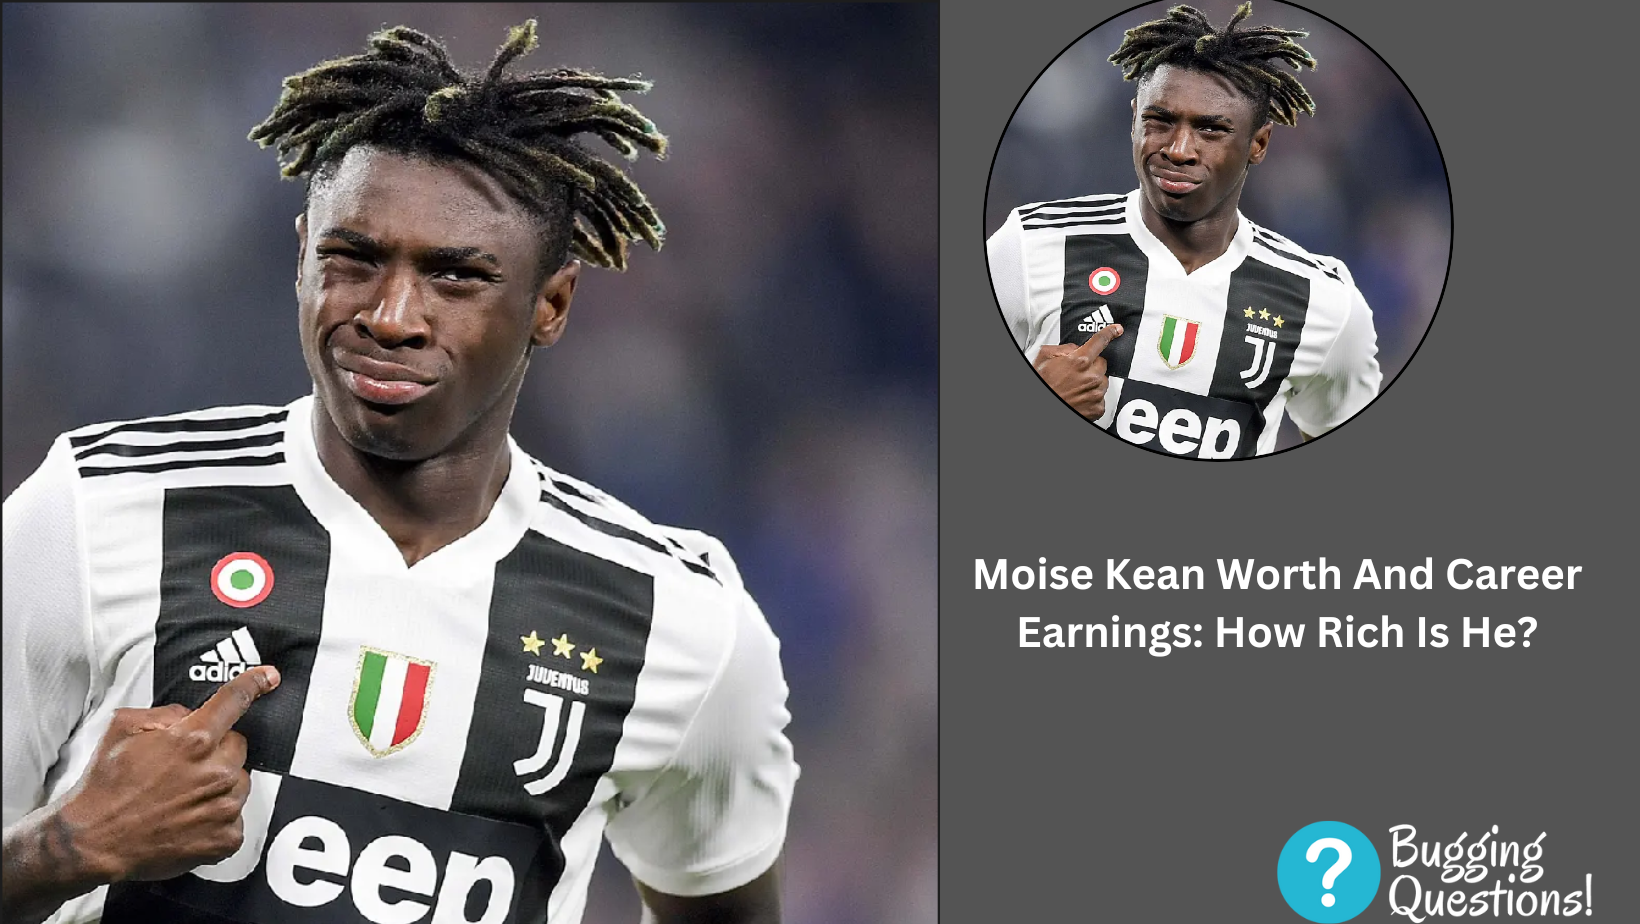 Moise Kean Worth And Career Earnings: How Rich Is He?